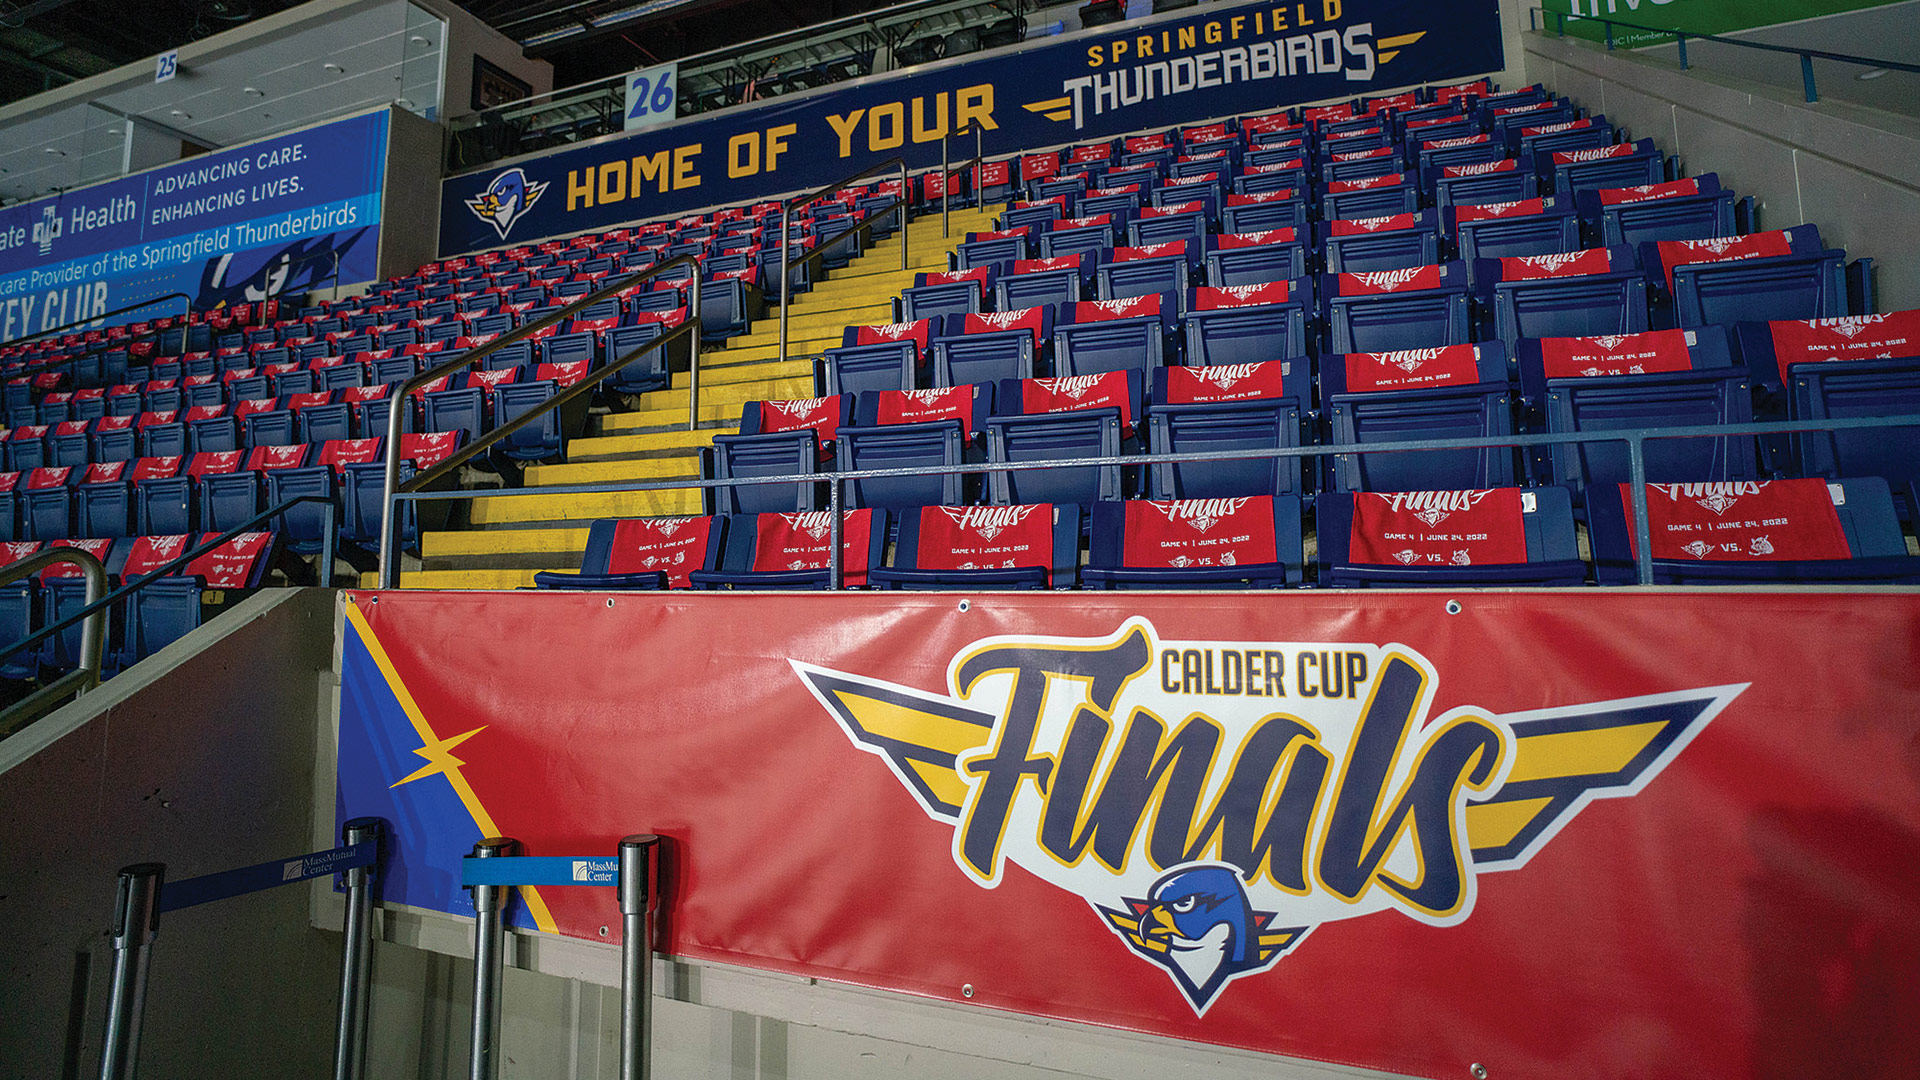 The T-Birds came up a few wins shy of an AHL championship